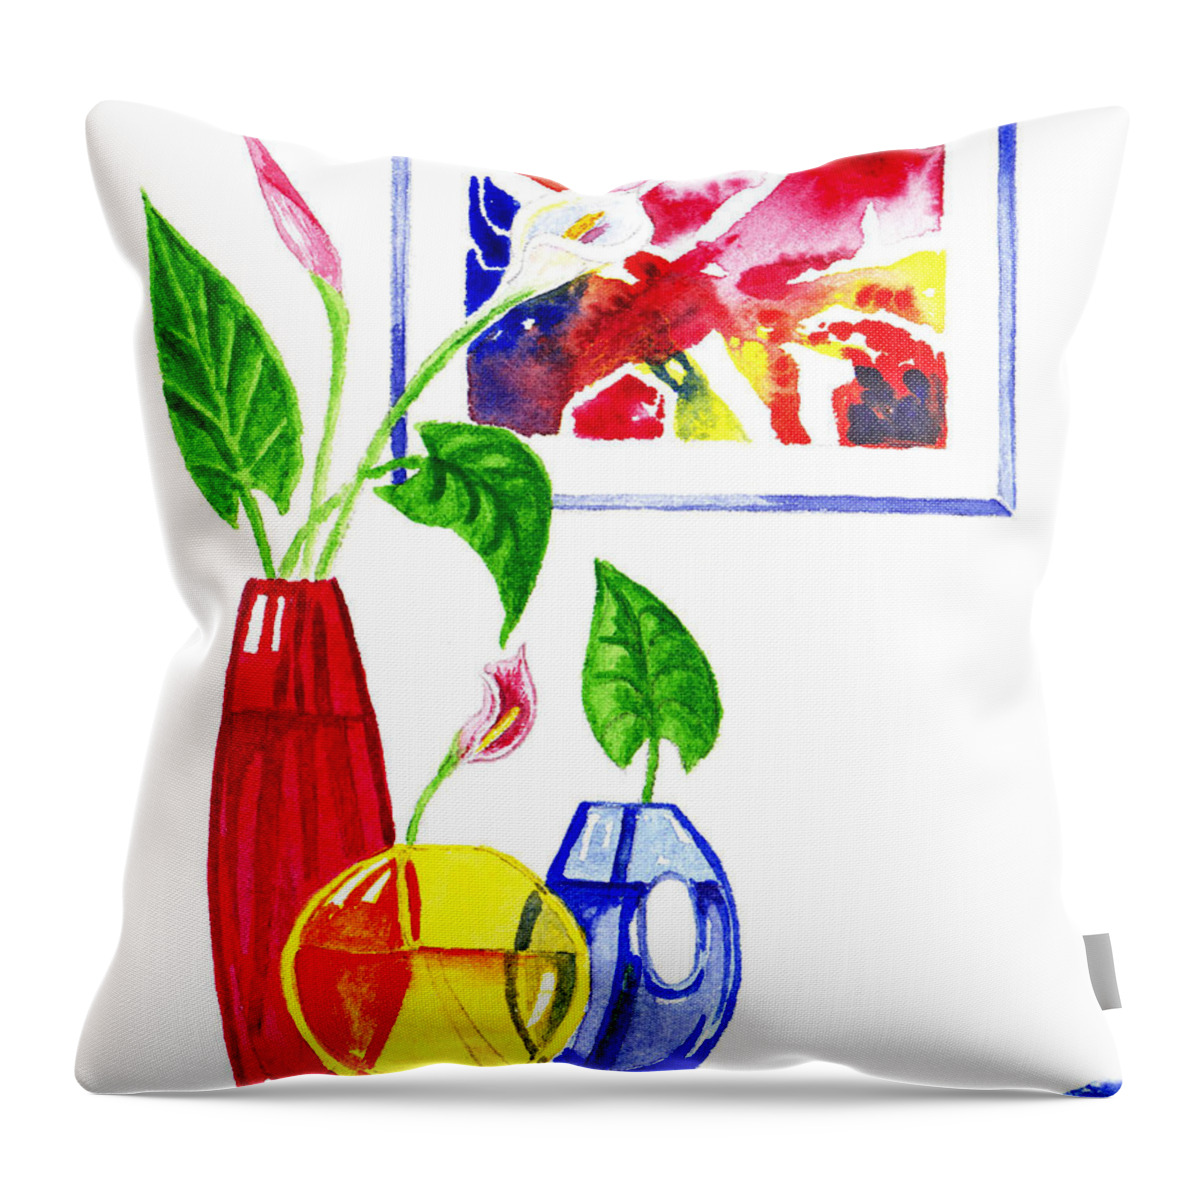 Red Throw Pillow featuring the painting Primary Colors Design by Irina Sztukowski